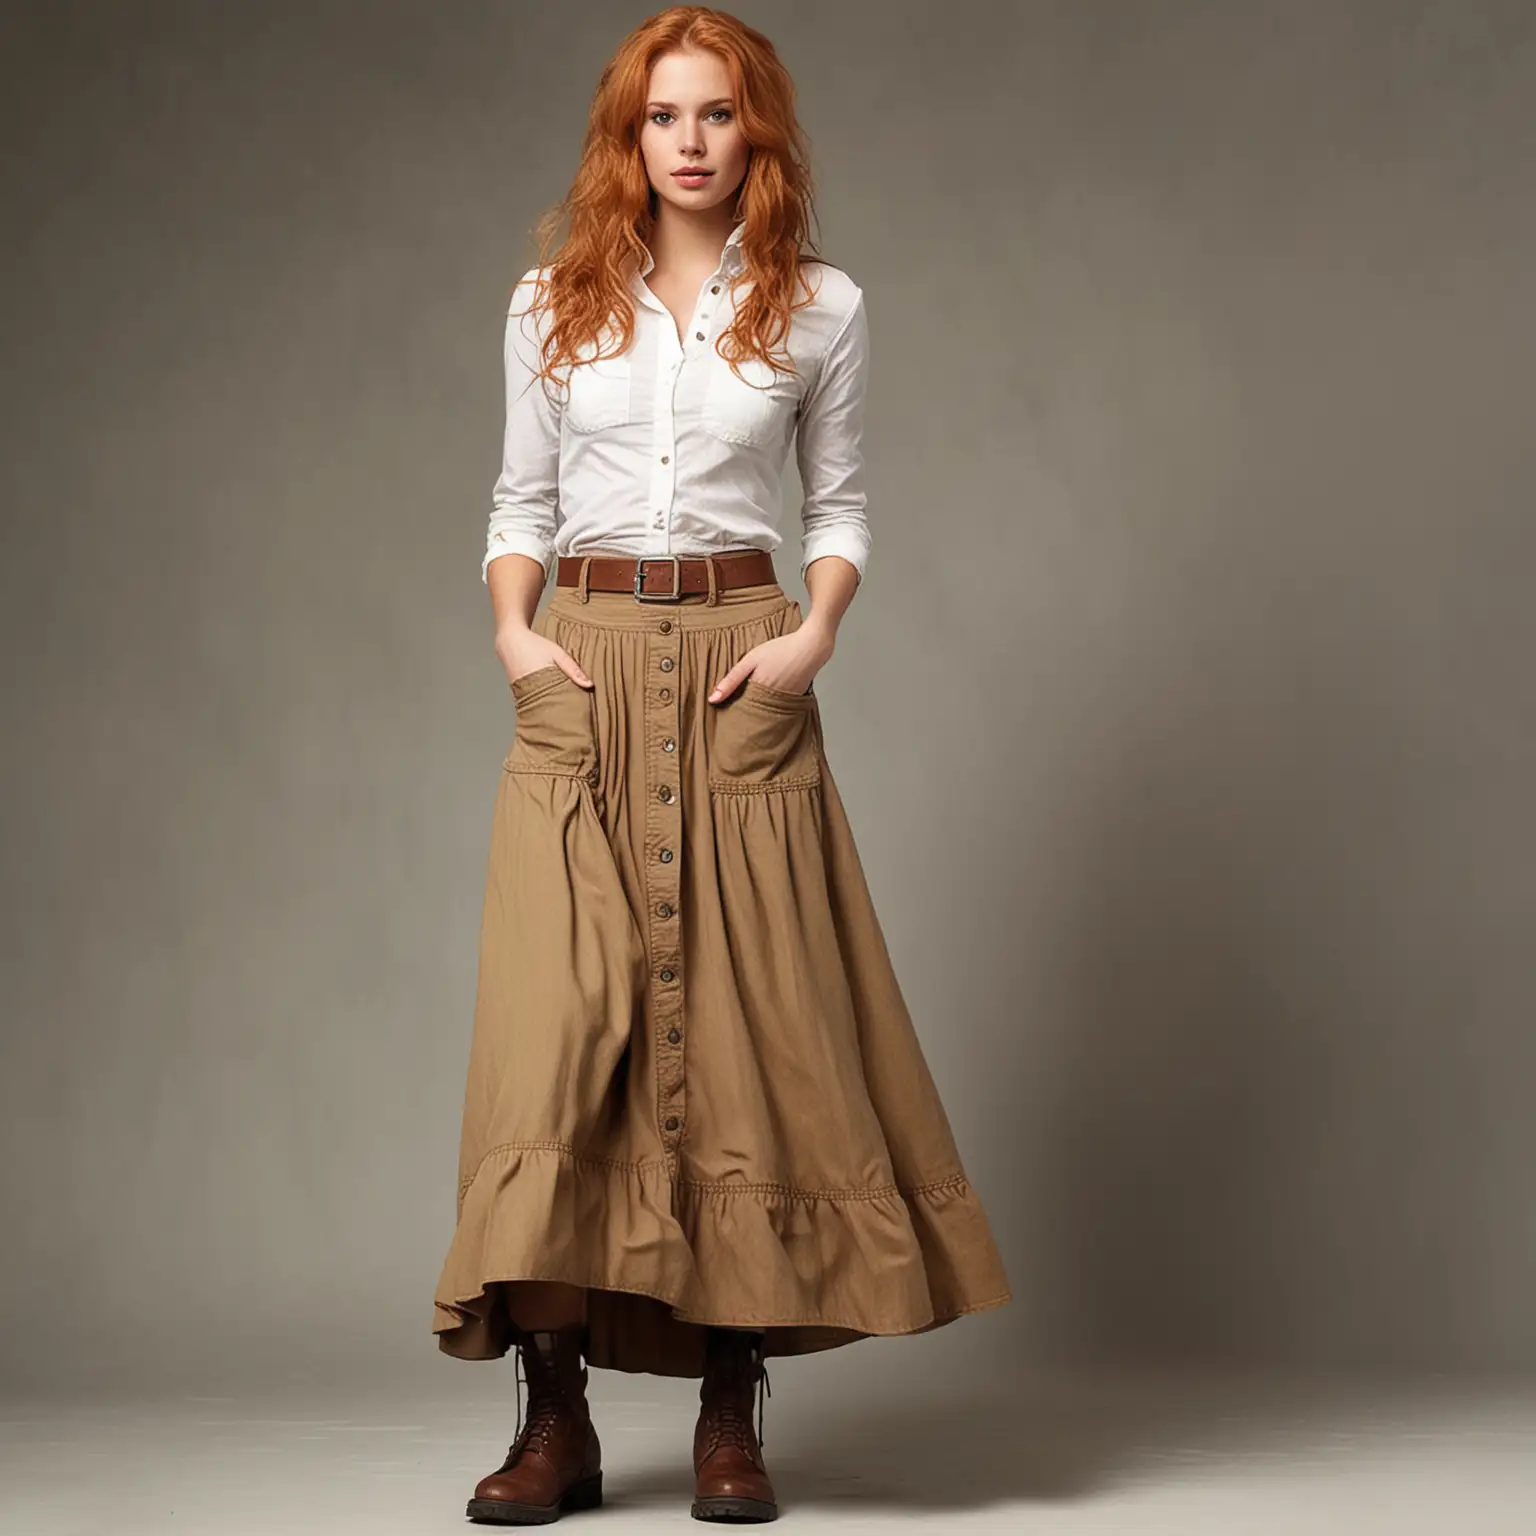 25-year old stawberry blonde hair woman in a long skirt with boots with hands in her pockets, show head to toe of woman